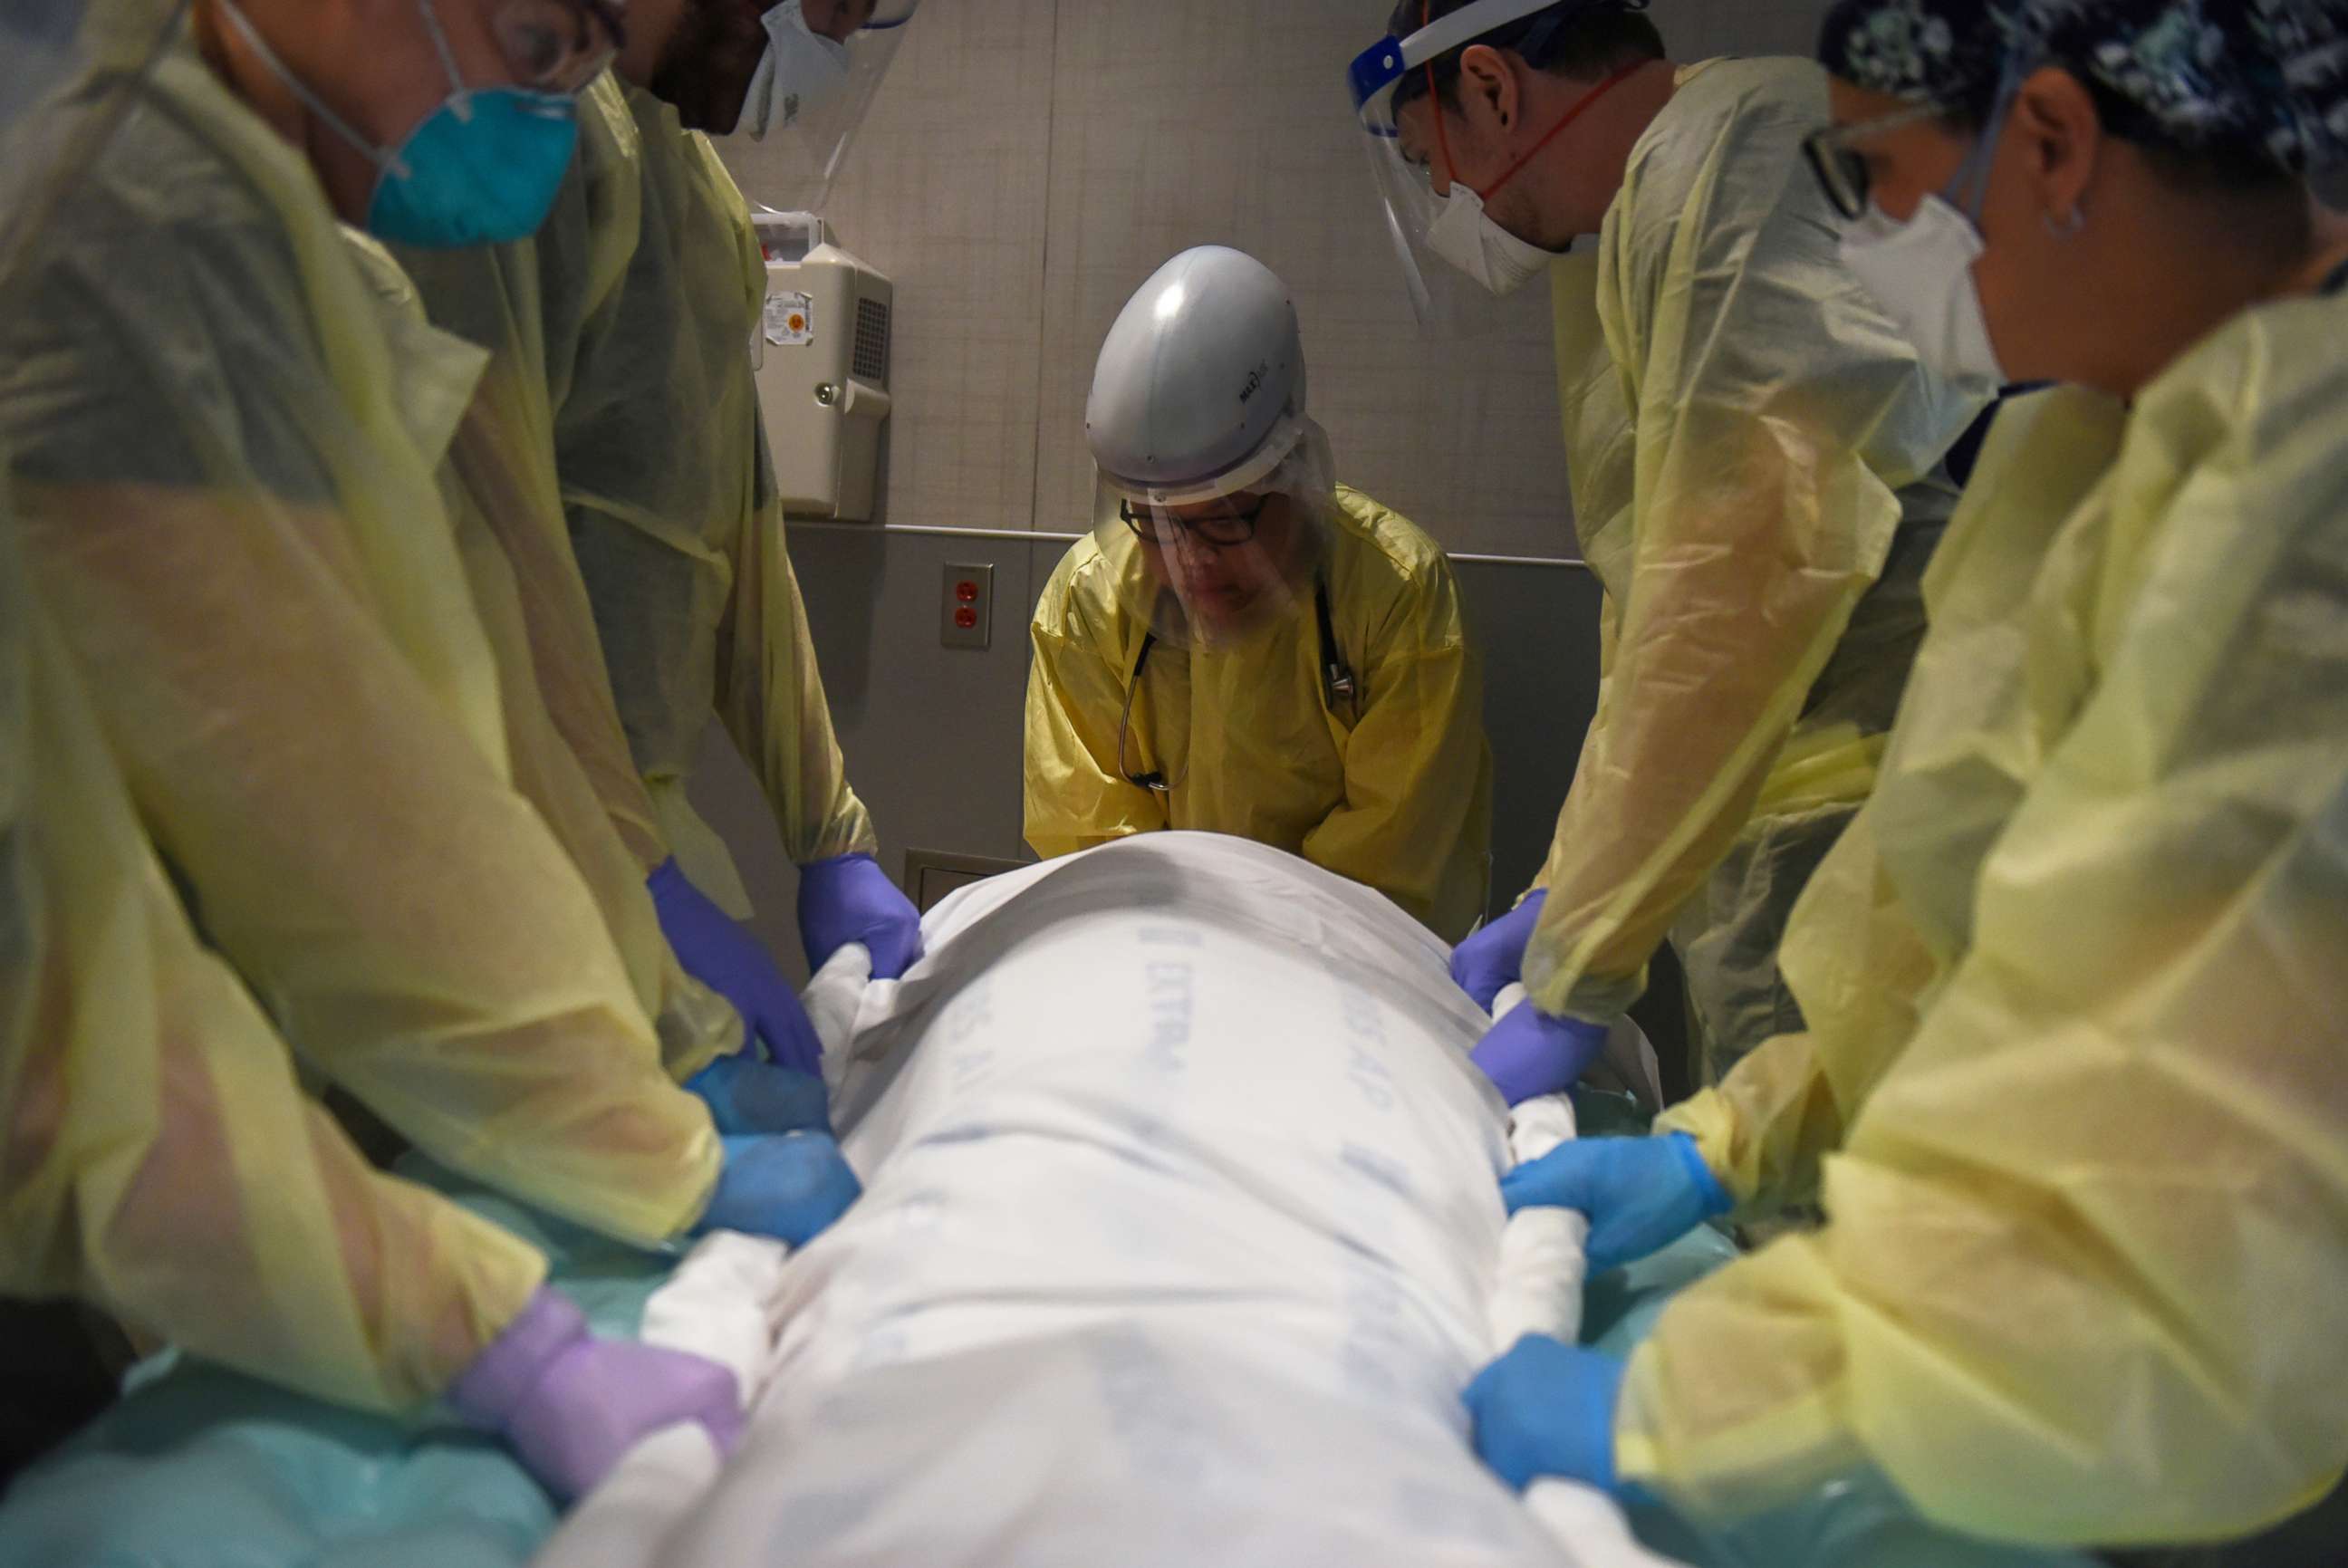 PHOTO: Healthcare personnel prepare to rotate a patient who is on a ventilator inside a room for patients with COVID-19 at a hospital in Hutchinson, Kansas, Nov. 20, 2020.